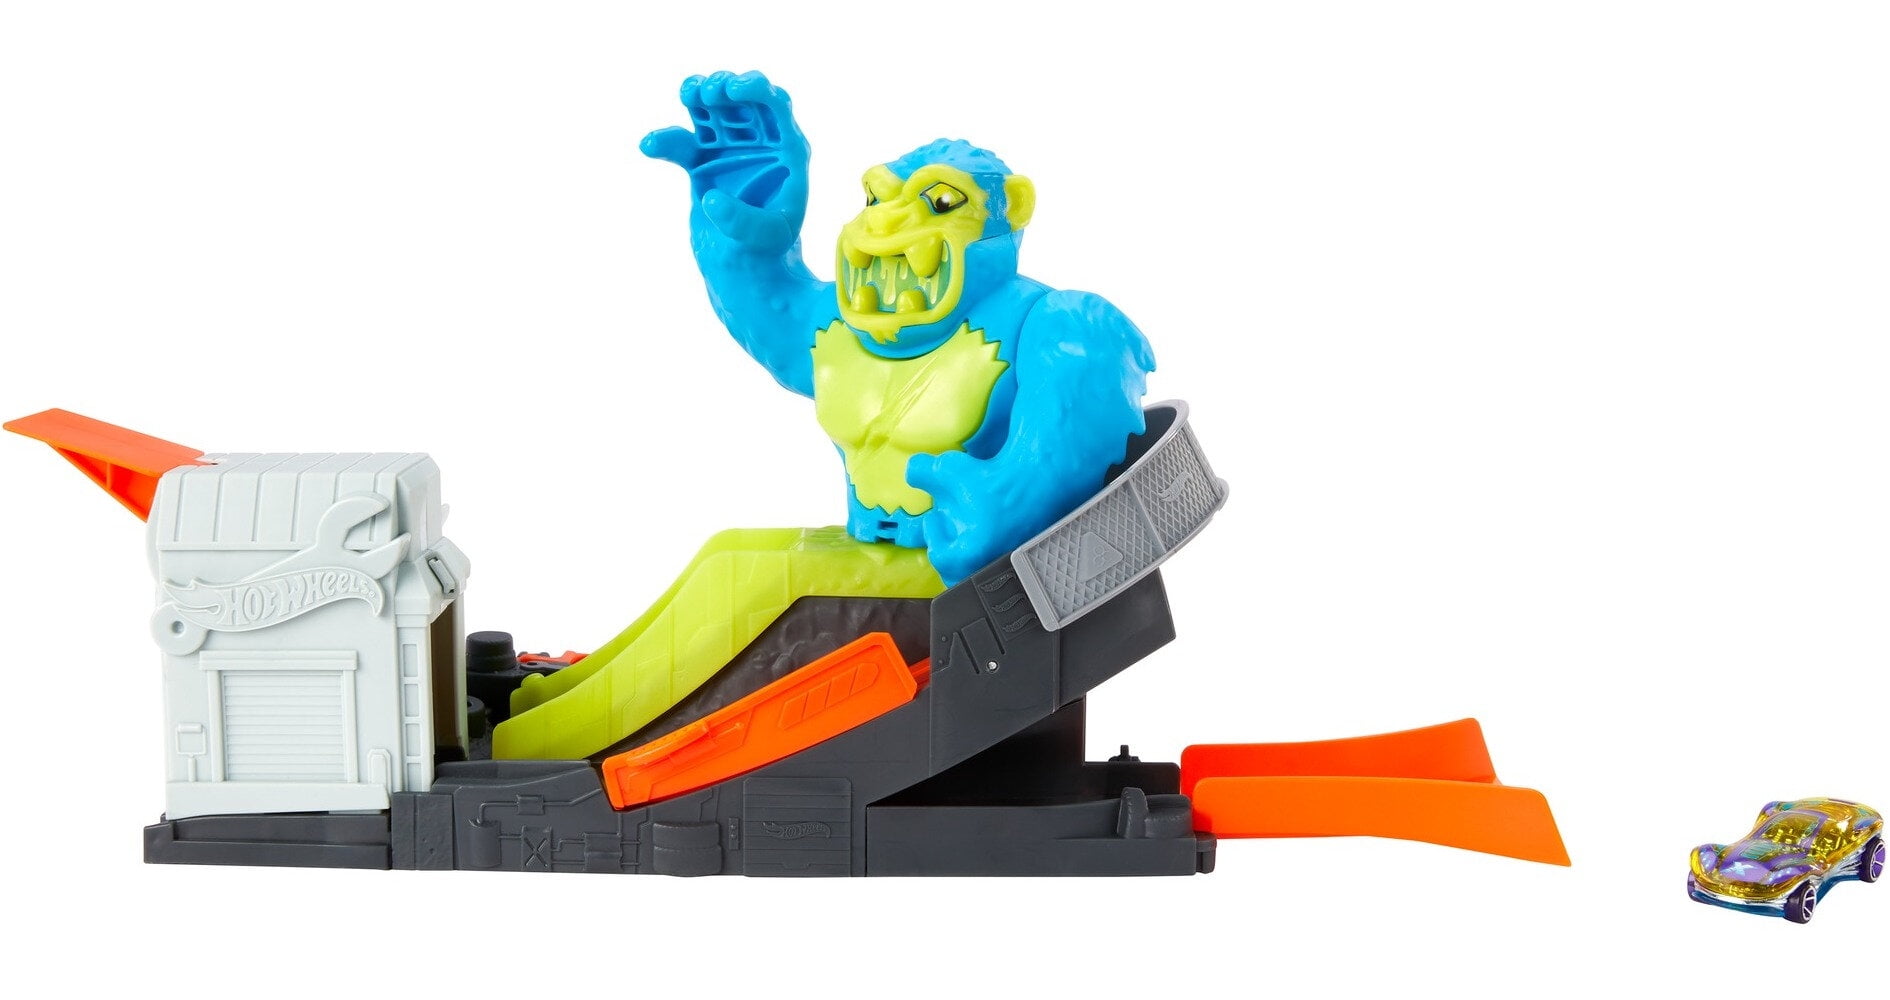 Hot Wheels Toxic Ape Attack Car Vehicle Playset, 25 Pieces 